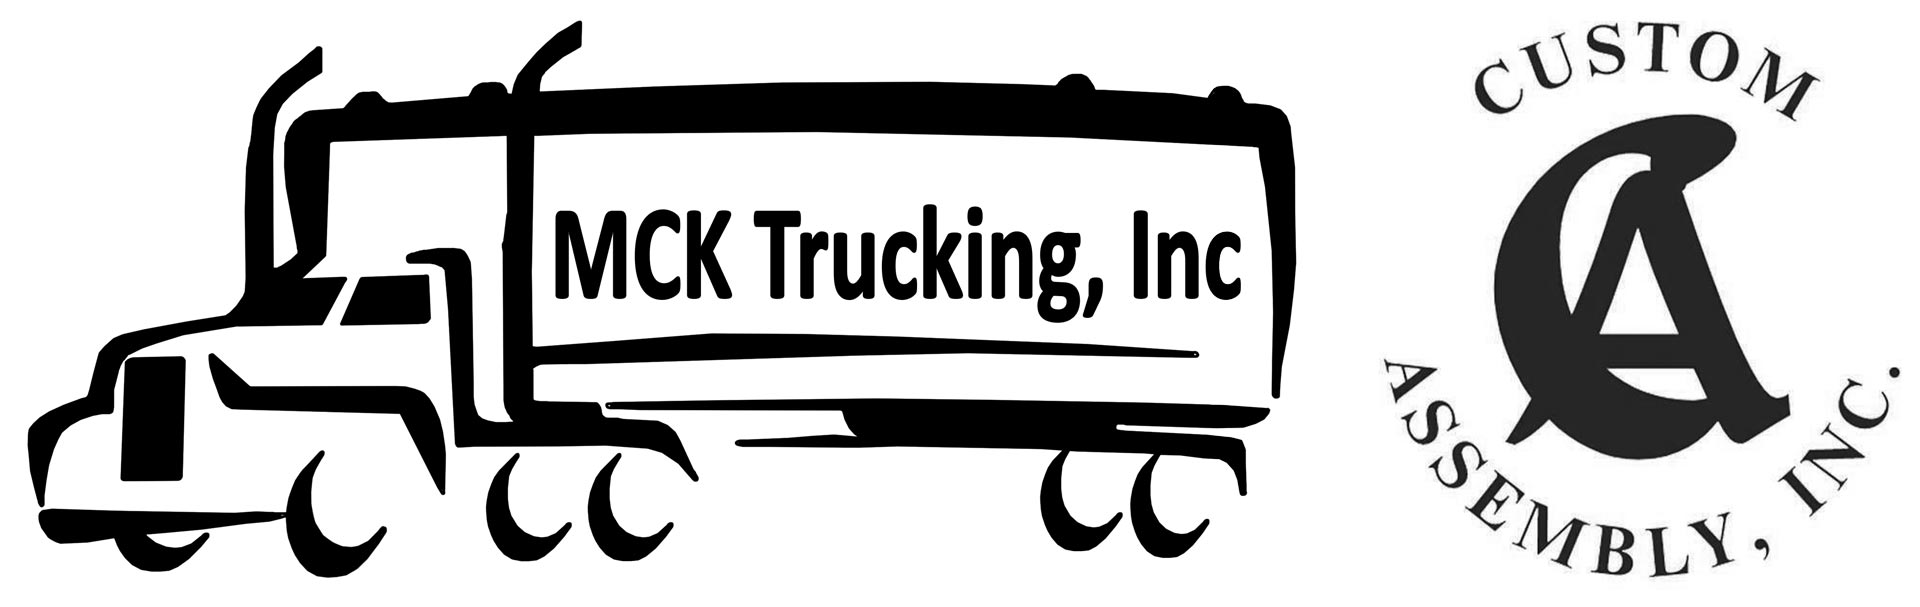 MCK Trucking and Custom Assembly Logos